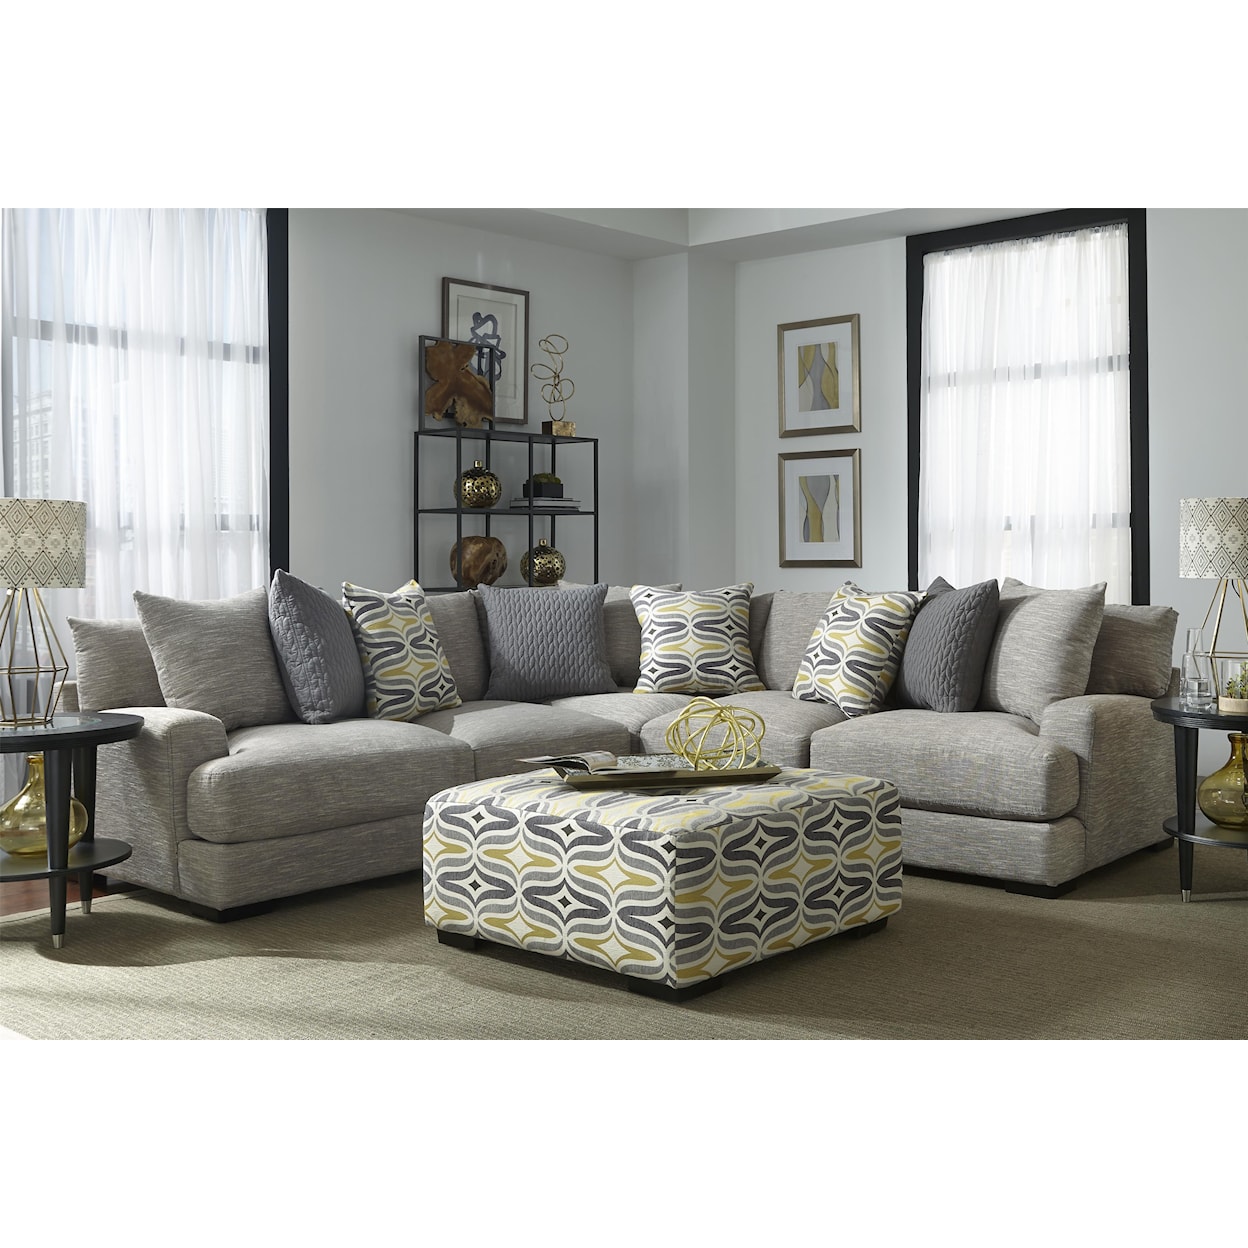 Franklin Oslo Sectional Sofa with 4 Seats